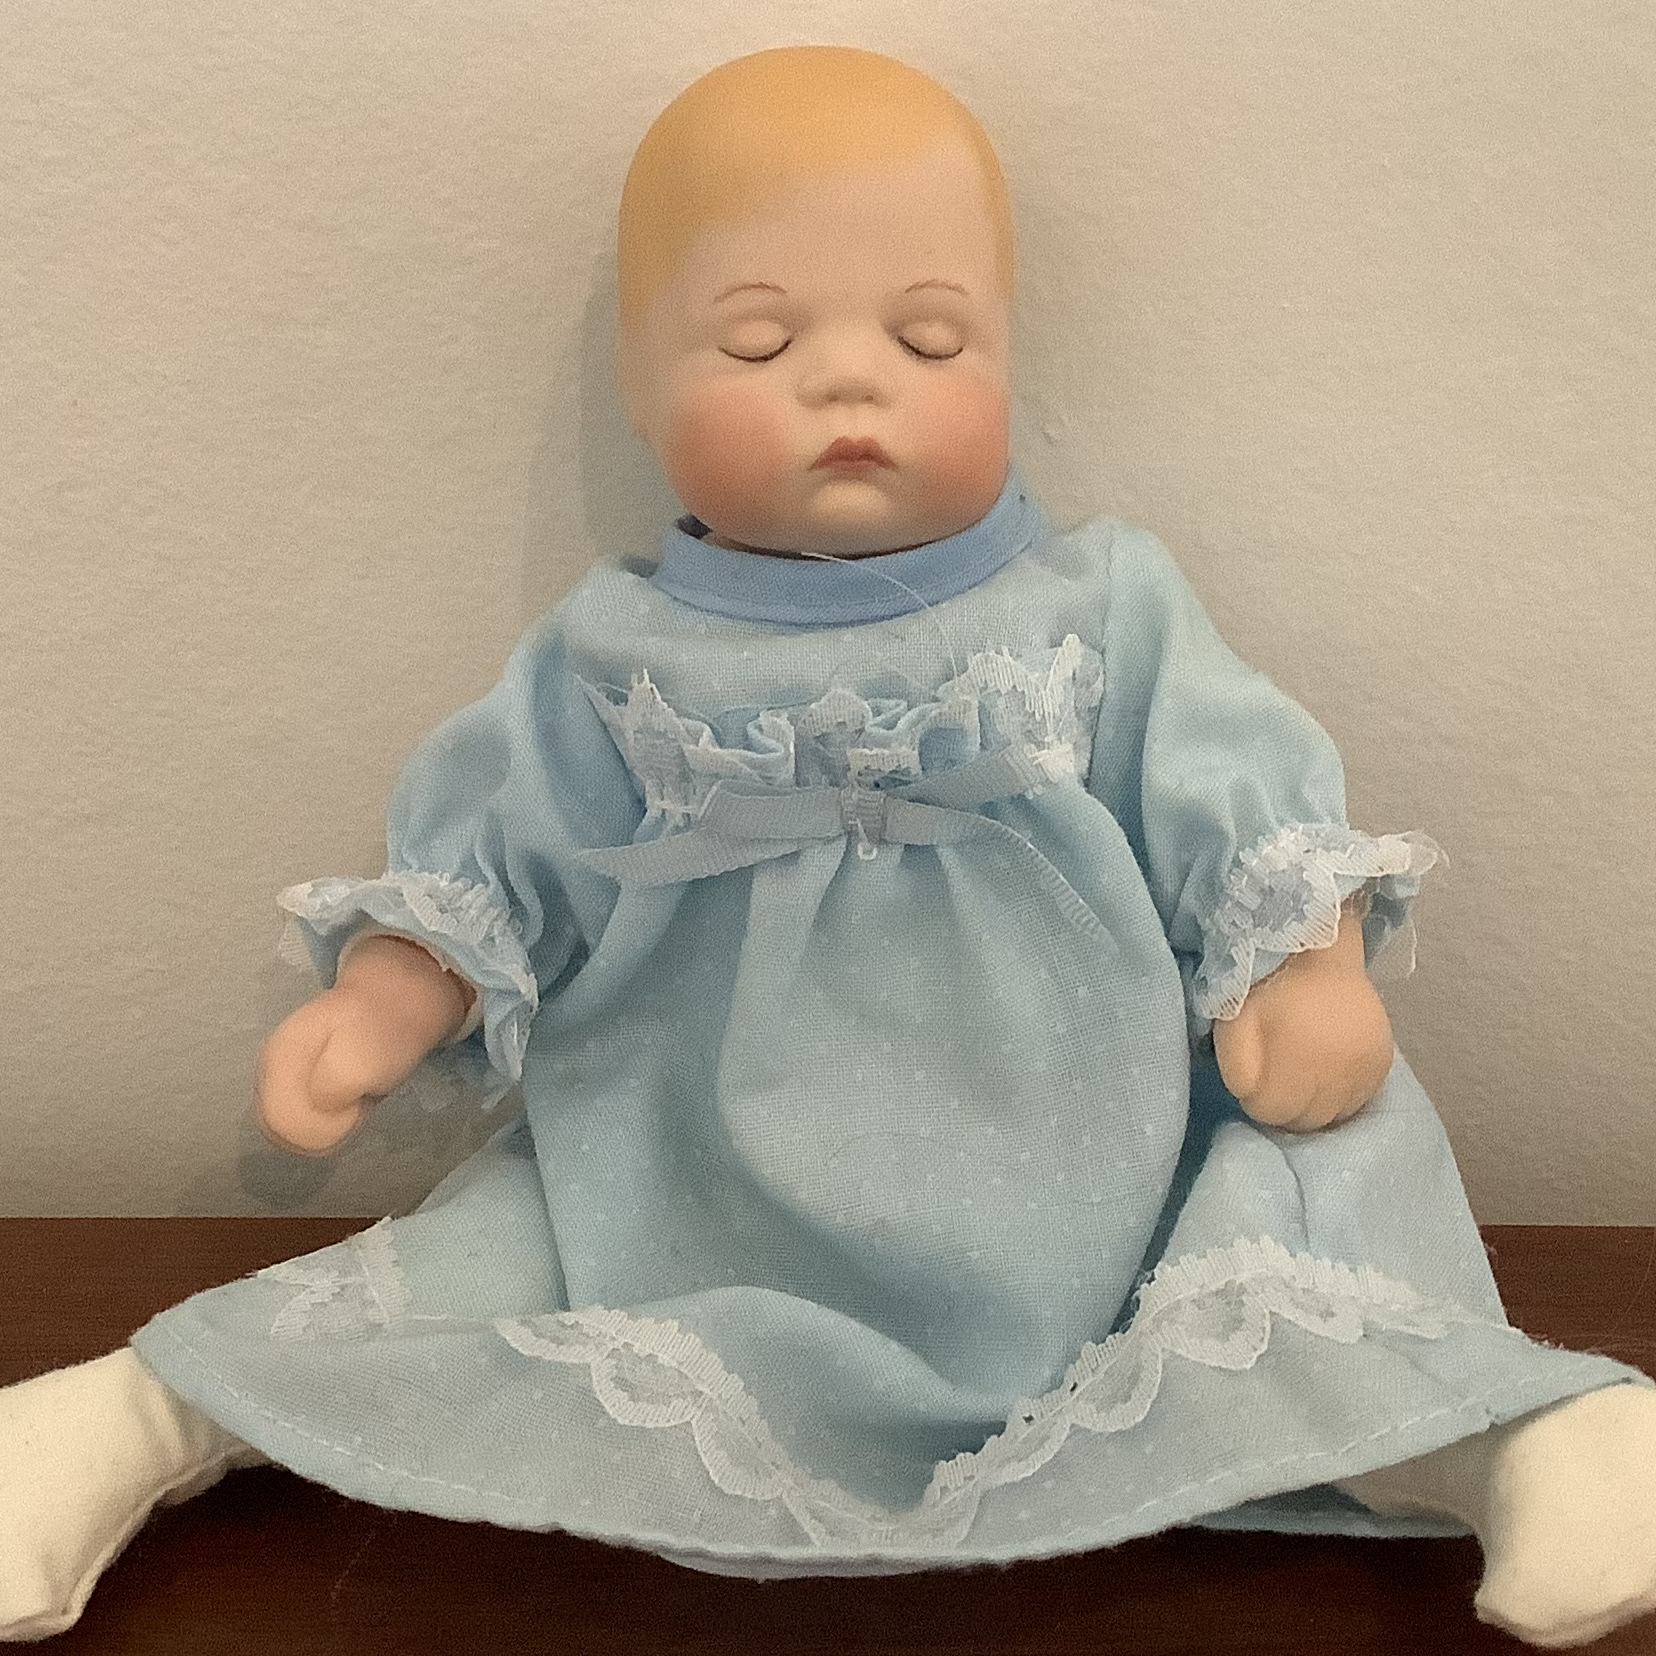 Modern 7-inch Sugar Lump doll with closed eyes, painted blond hair and blue nightgown